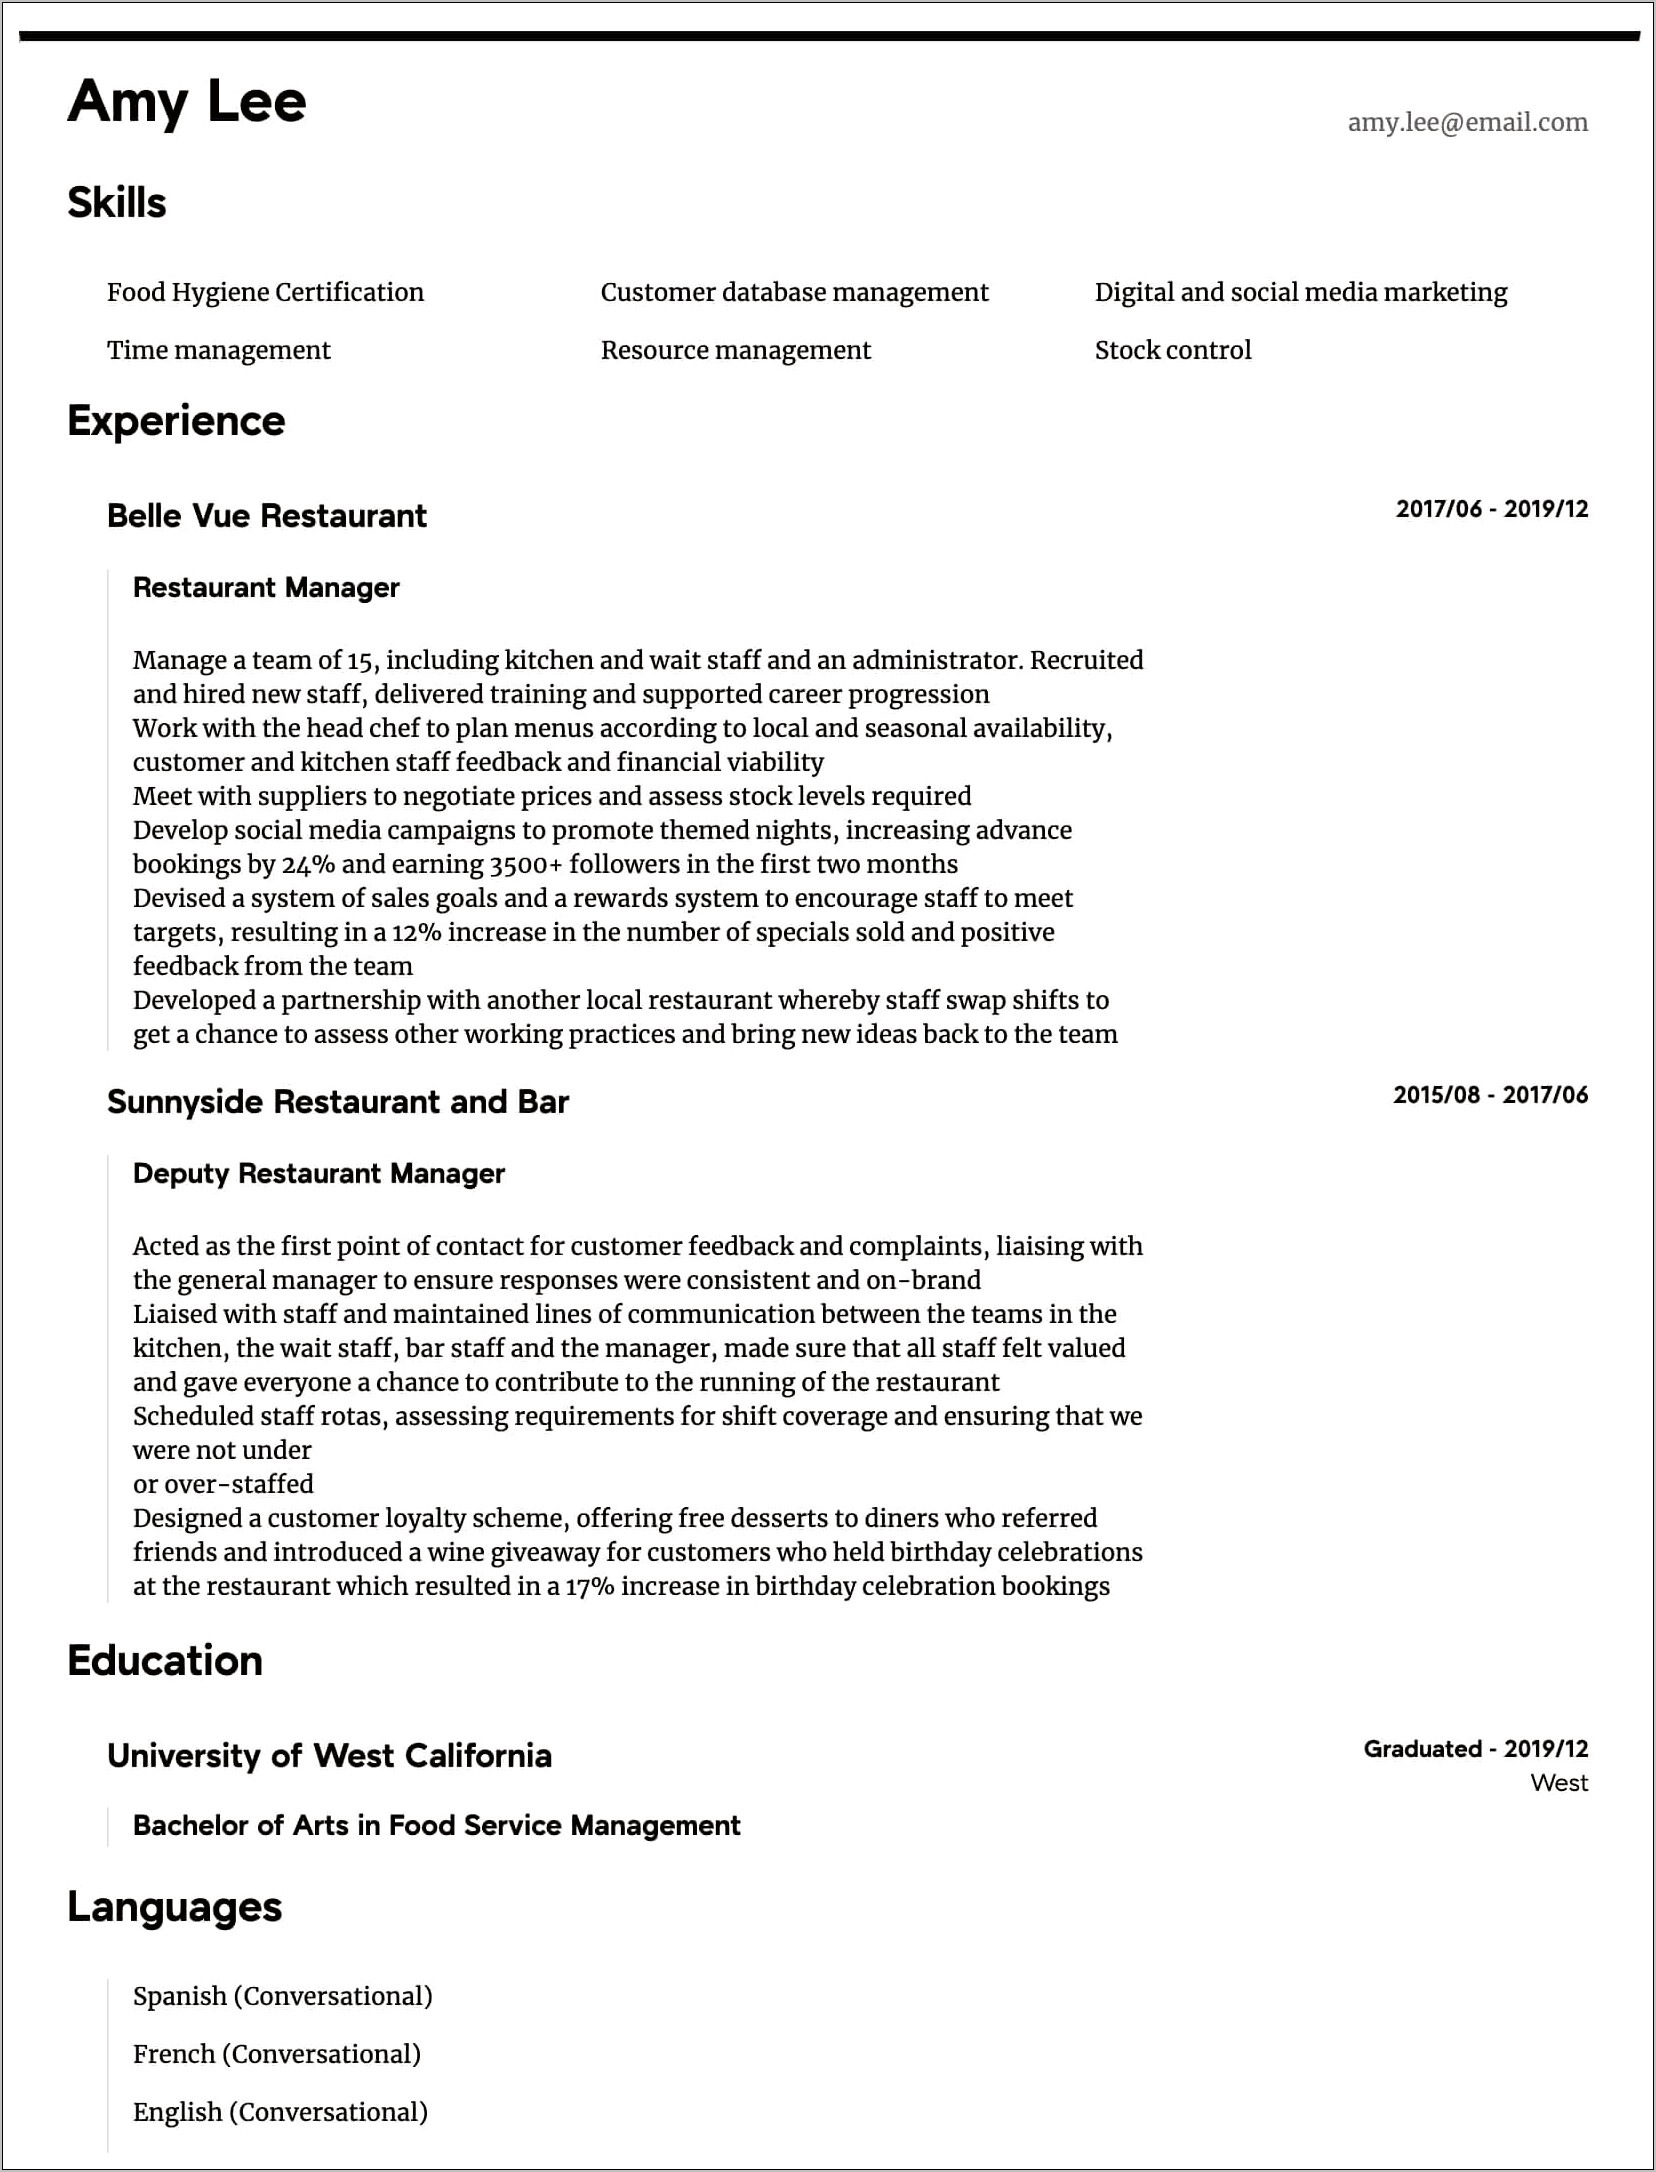 Resumes For Working In A Restaurant